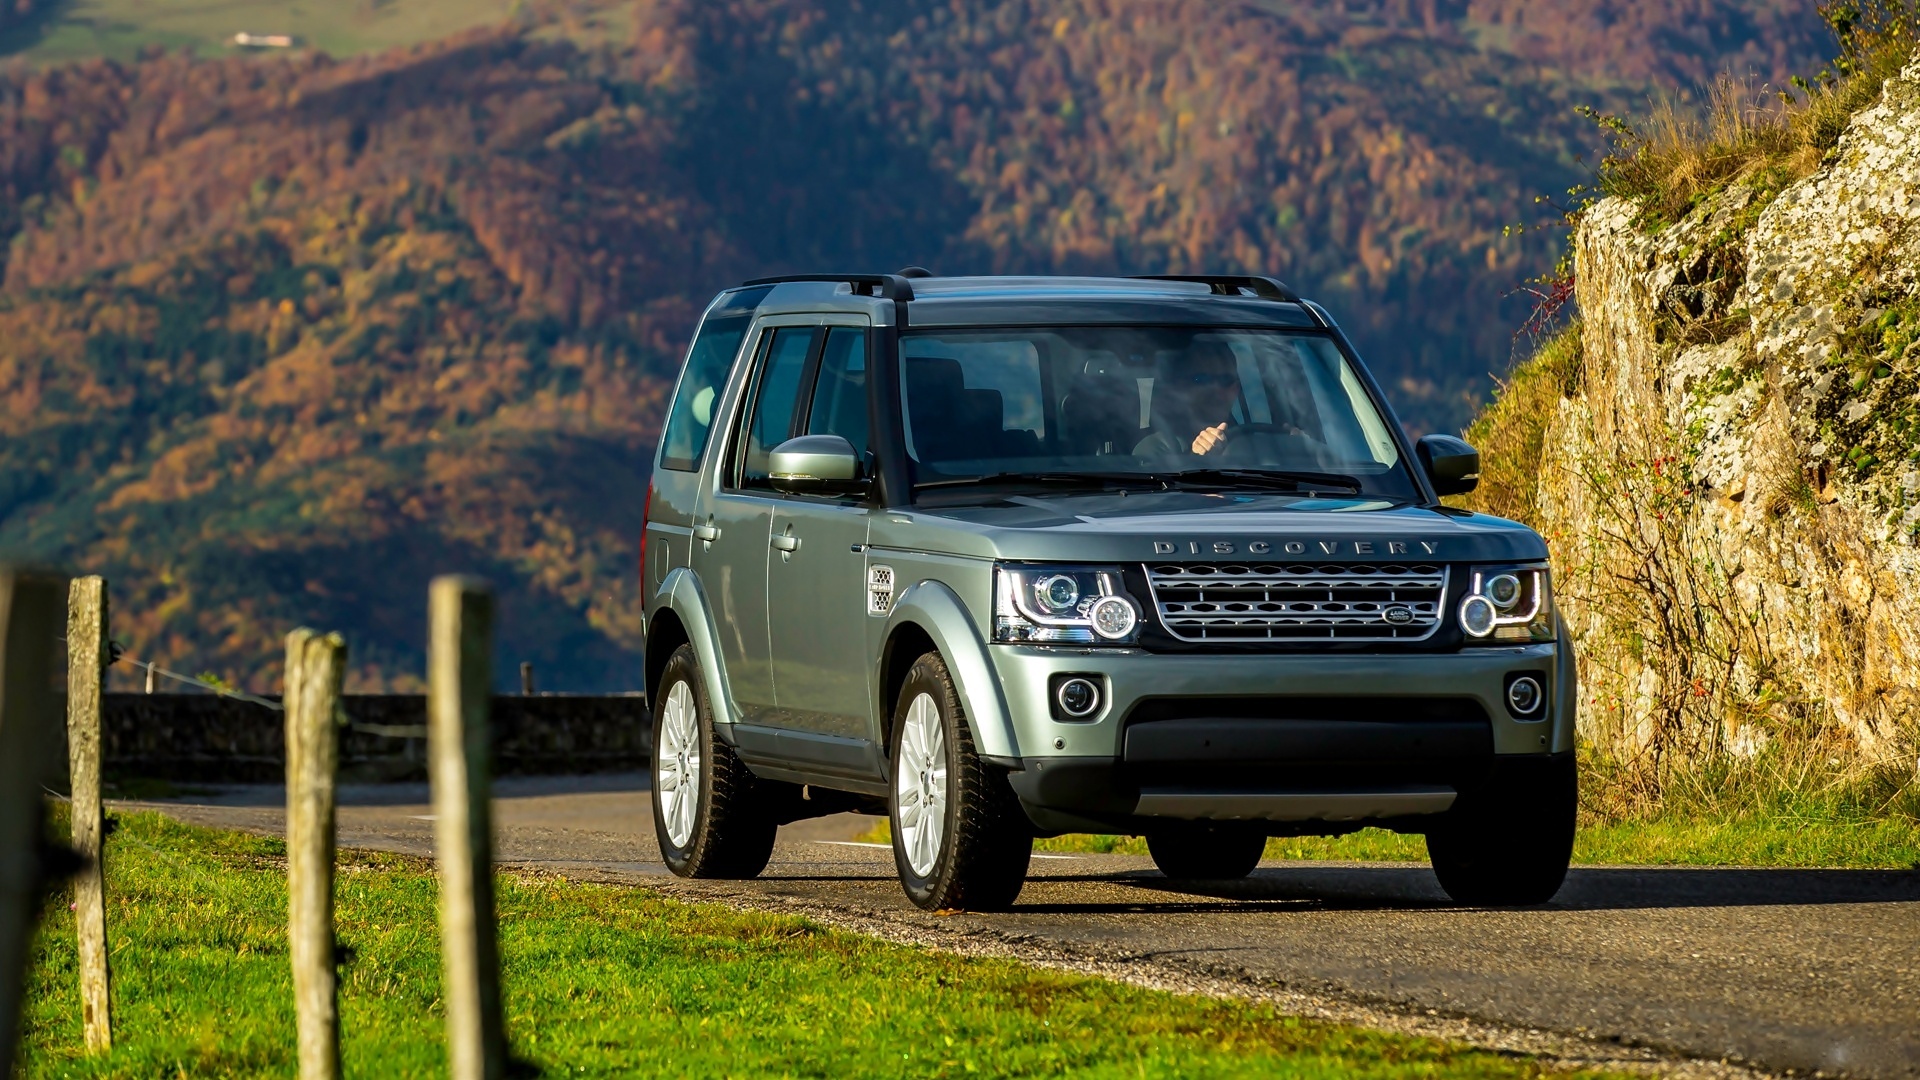 Land Rover, Discovery, Droga